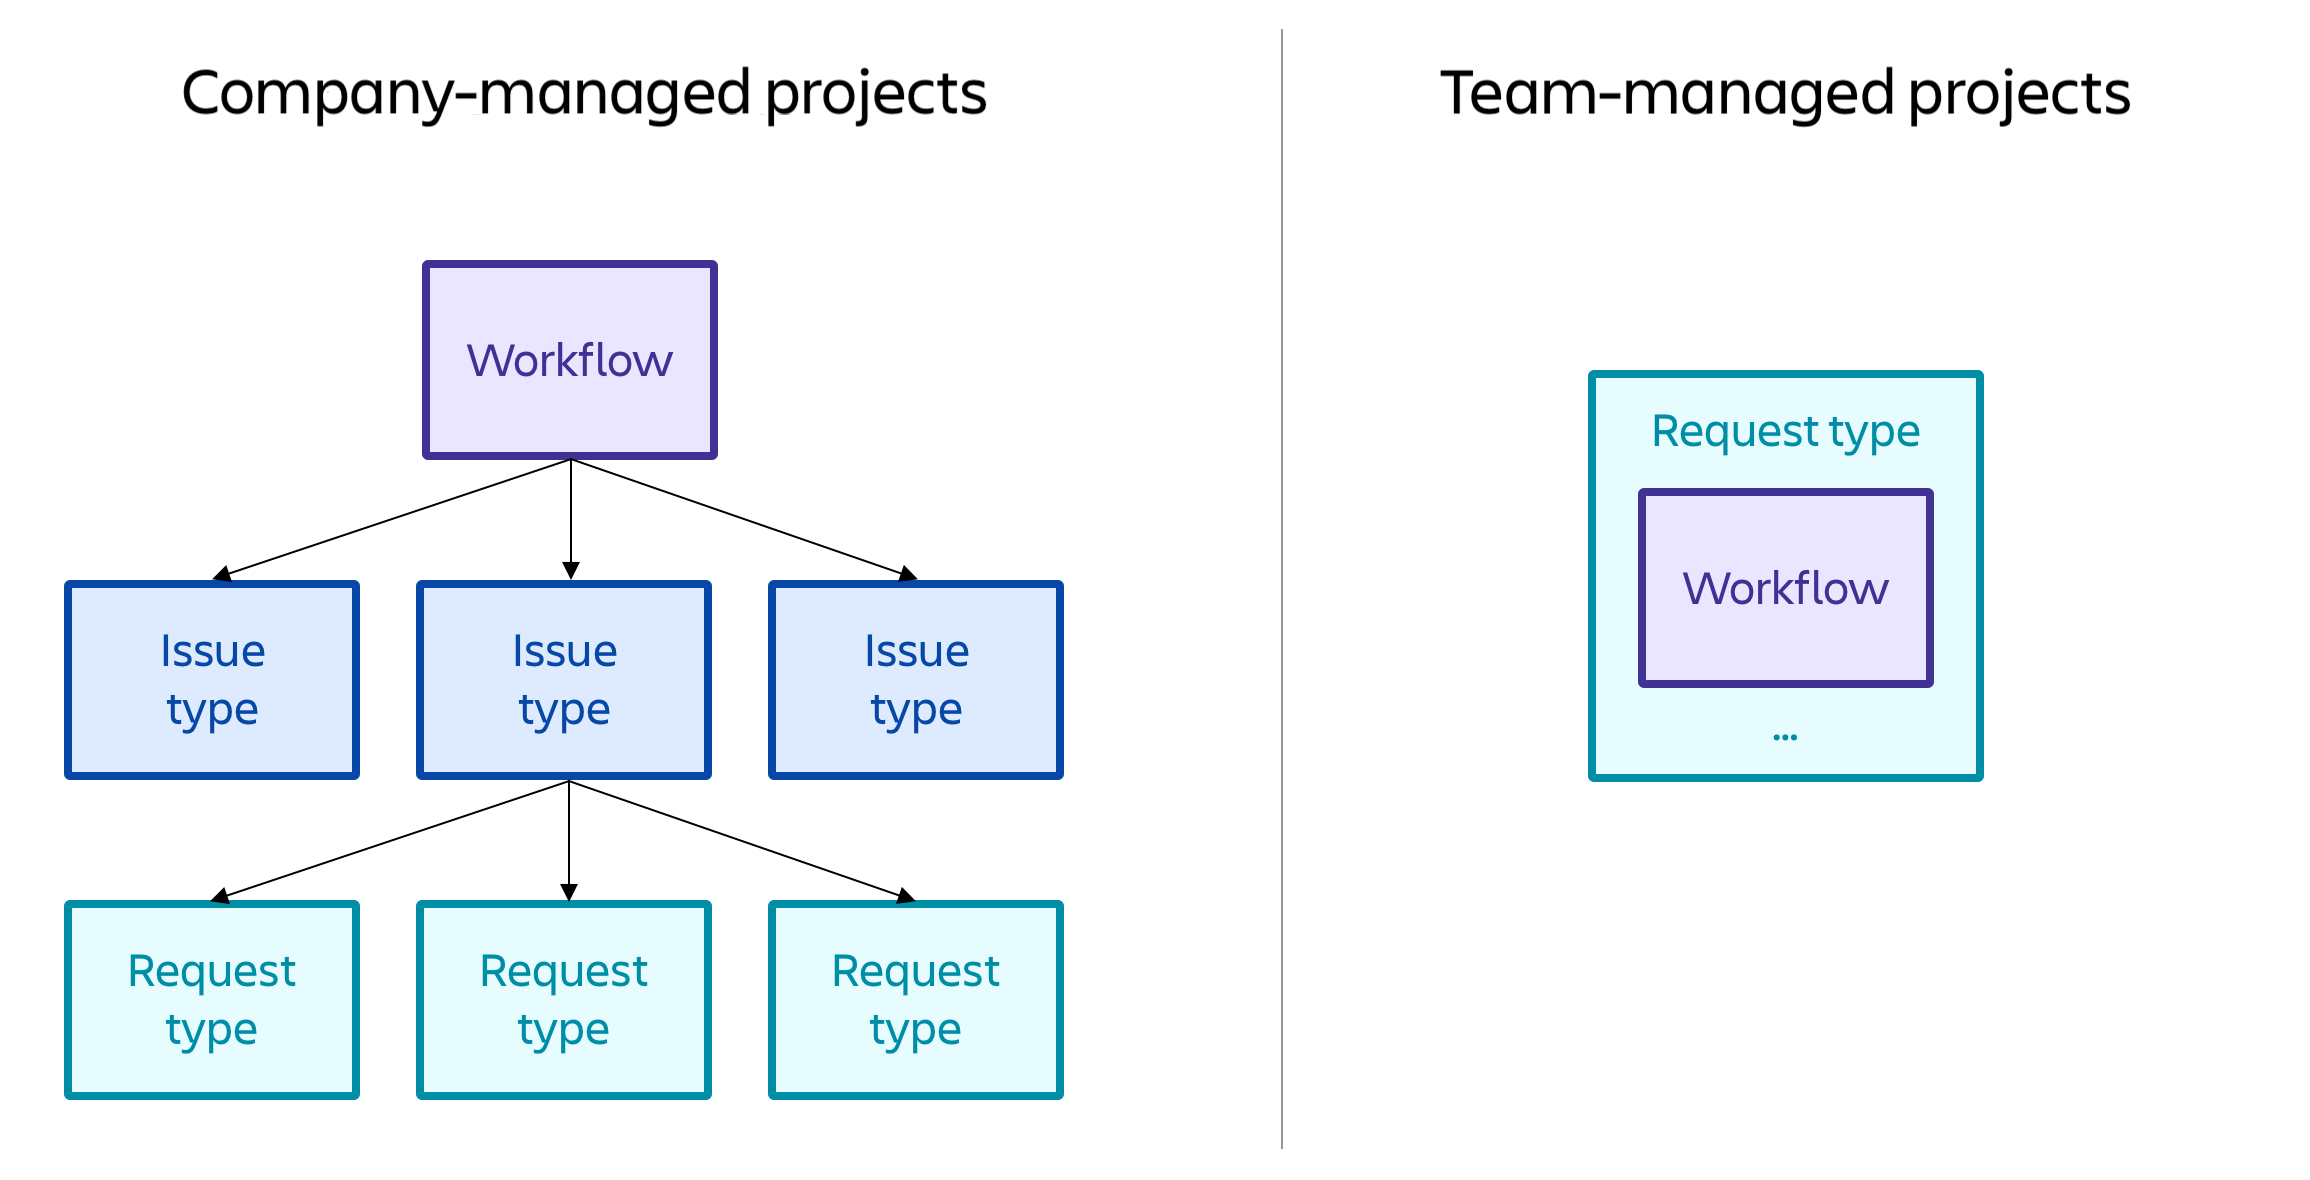 Company-managed workflows can be shared across request types, and team-managed workflows are request type independent